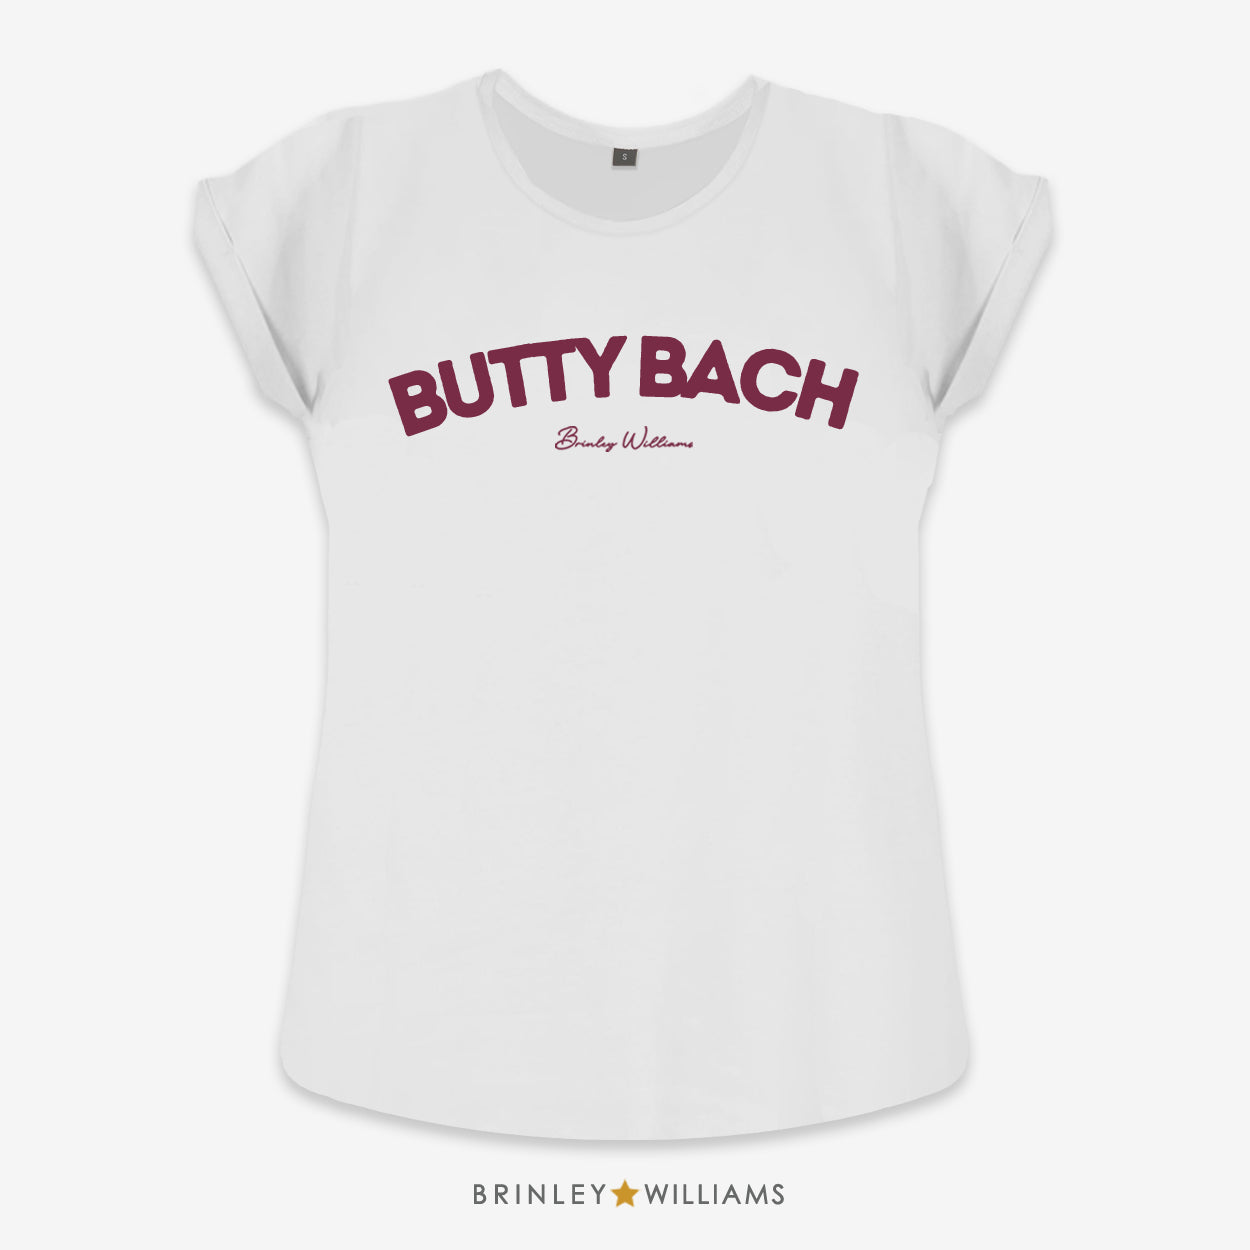 Butty Bach Rolled Sleeve T-shirt - White